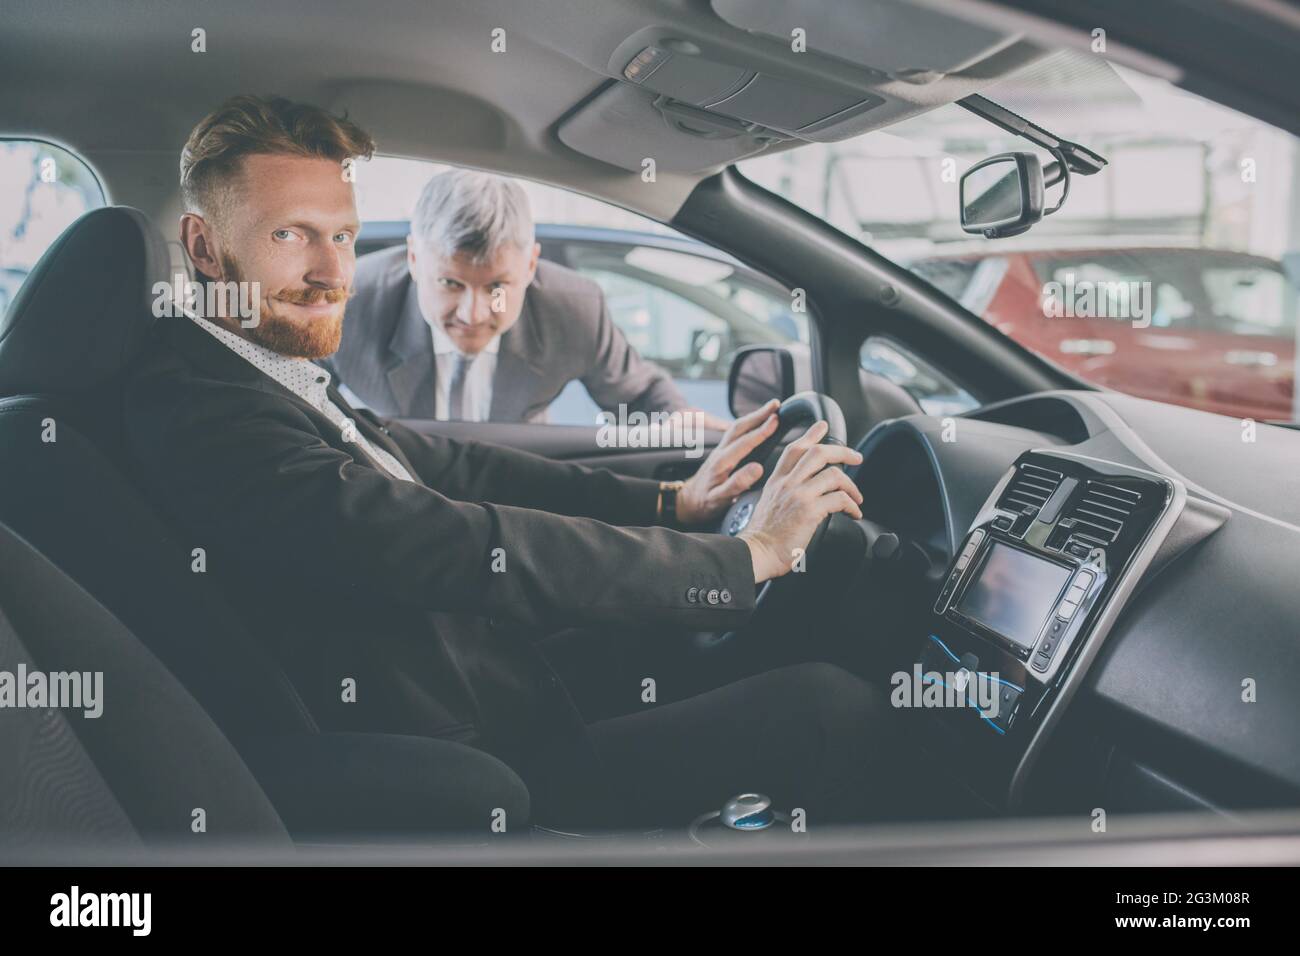 Vehicle dealer showing new car to a handsome man. Stock Photo